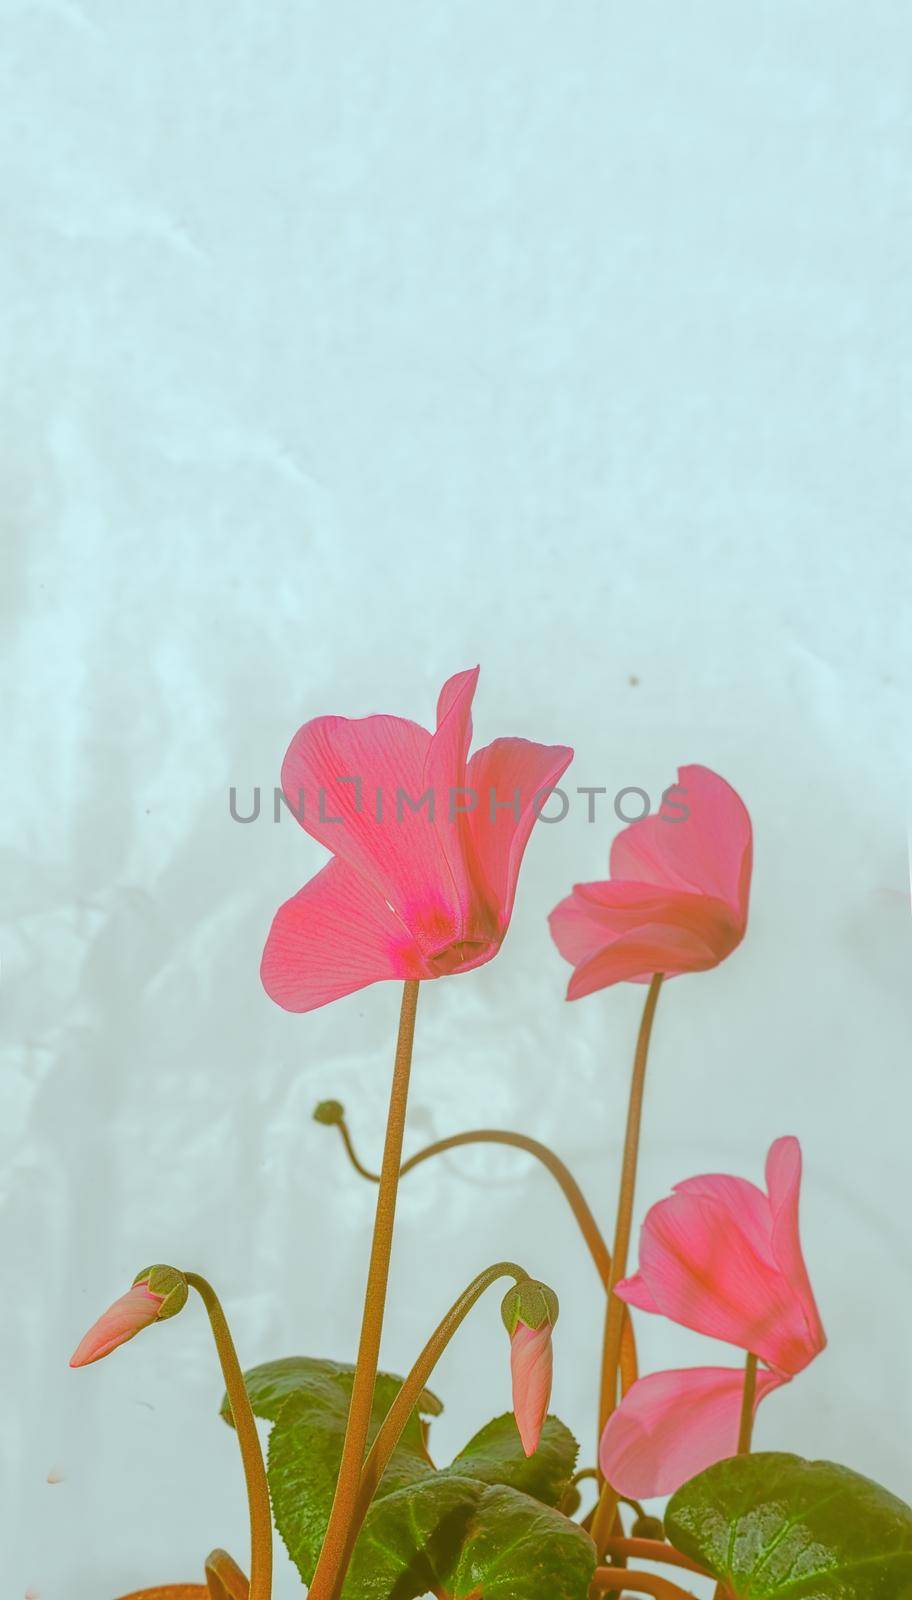 The indoor flower is cyclamen with bright pink flowers surrounded by green leaves on a light background. Front view, copy space